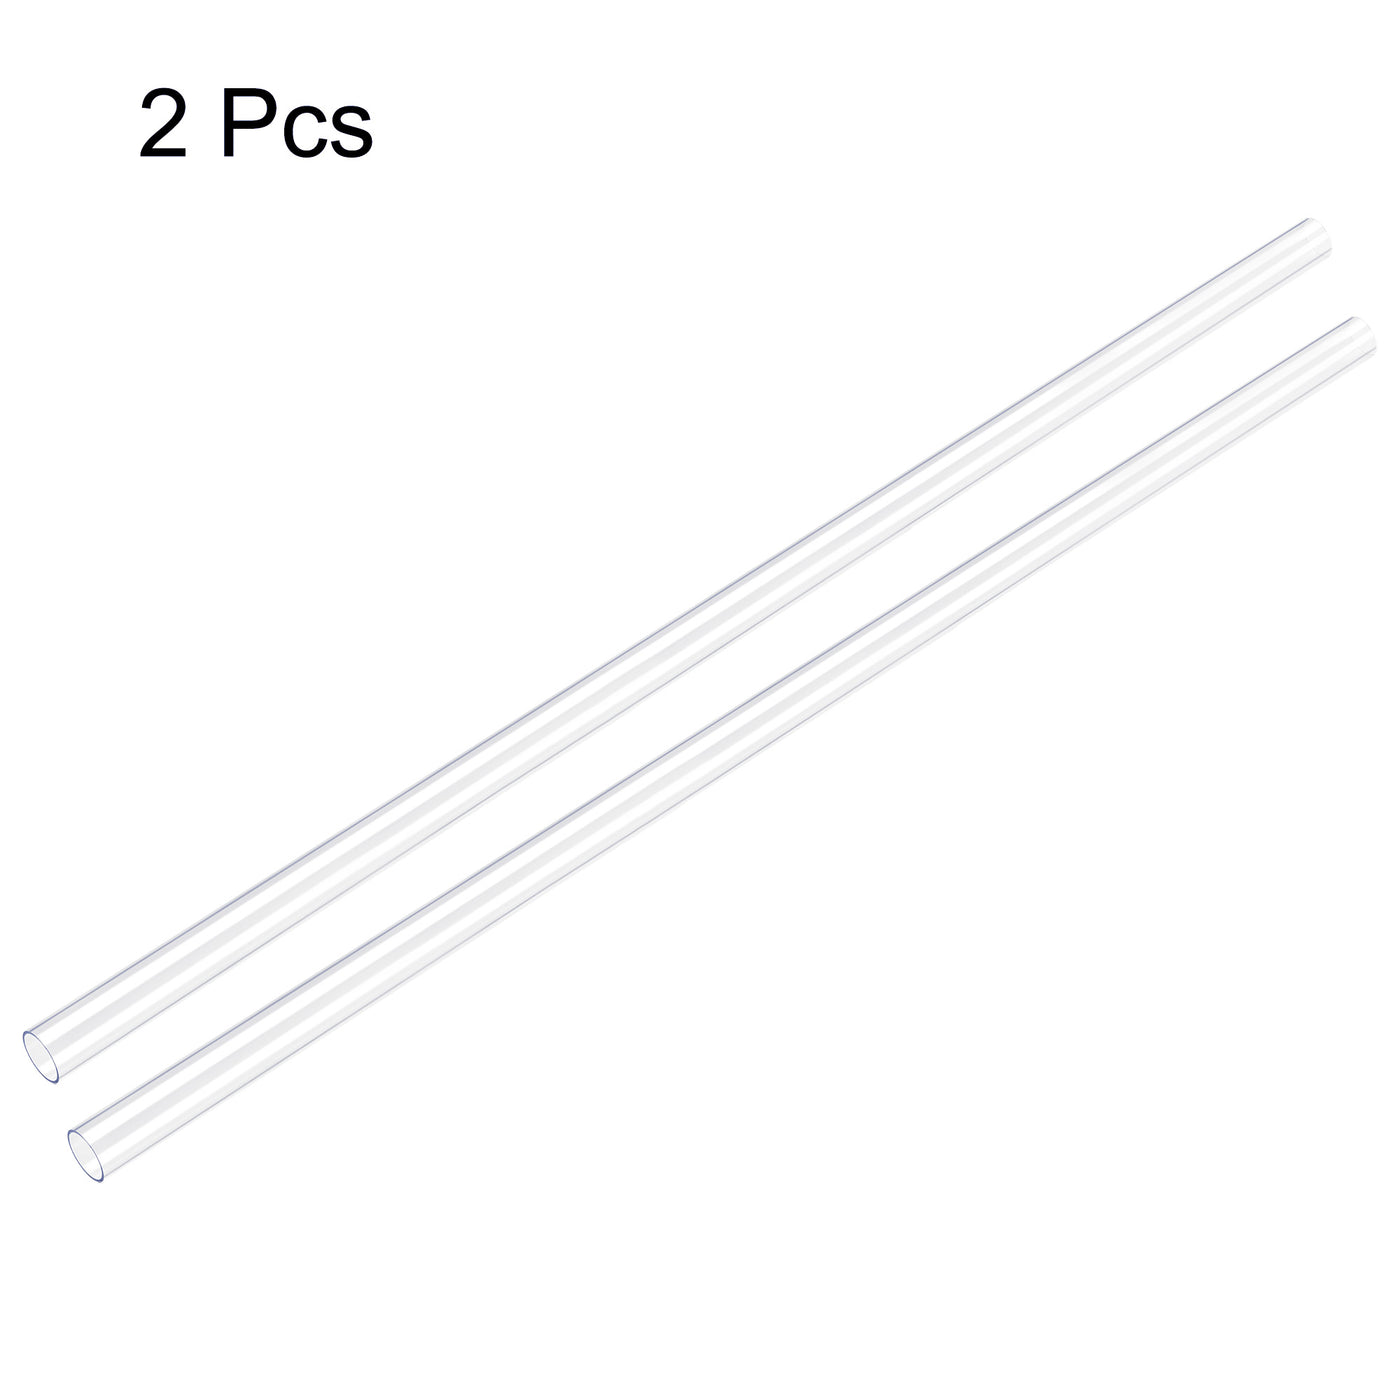 Uxcell Uxcell Polycarbonate Rigid Round Clear Tubing 20mm(0.78 Inch)IDx21mm(0.82 Inch)ODx500mm(1.64Ft) Length Plastic Tube 2pcs